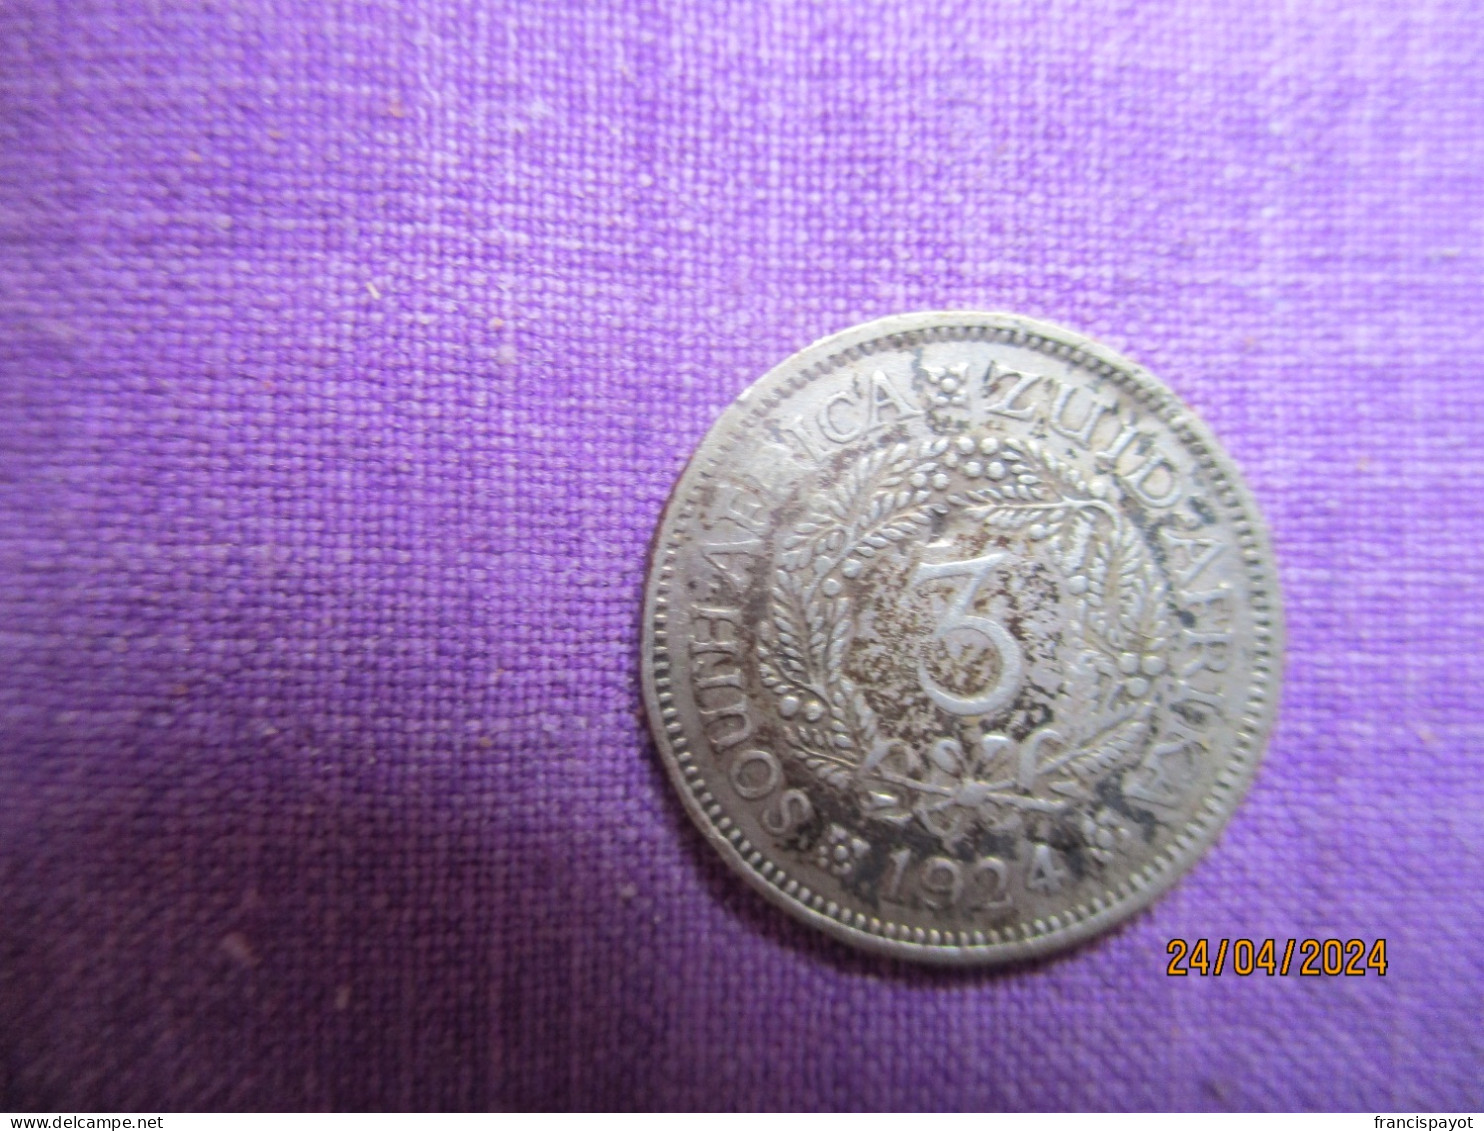 South Africa: 3 Pence 1924 - South Africa